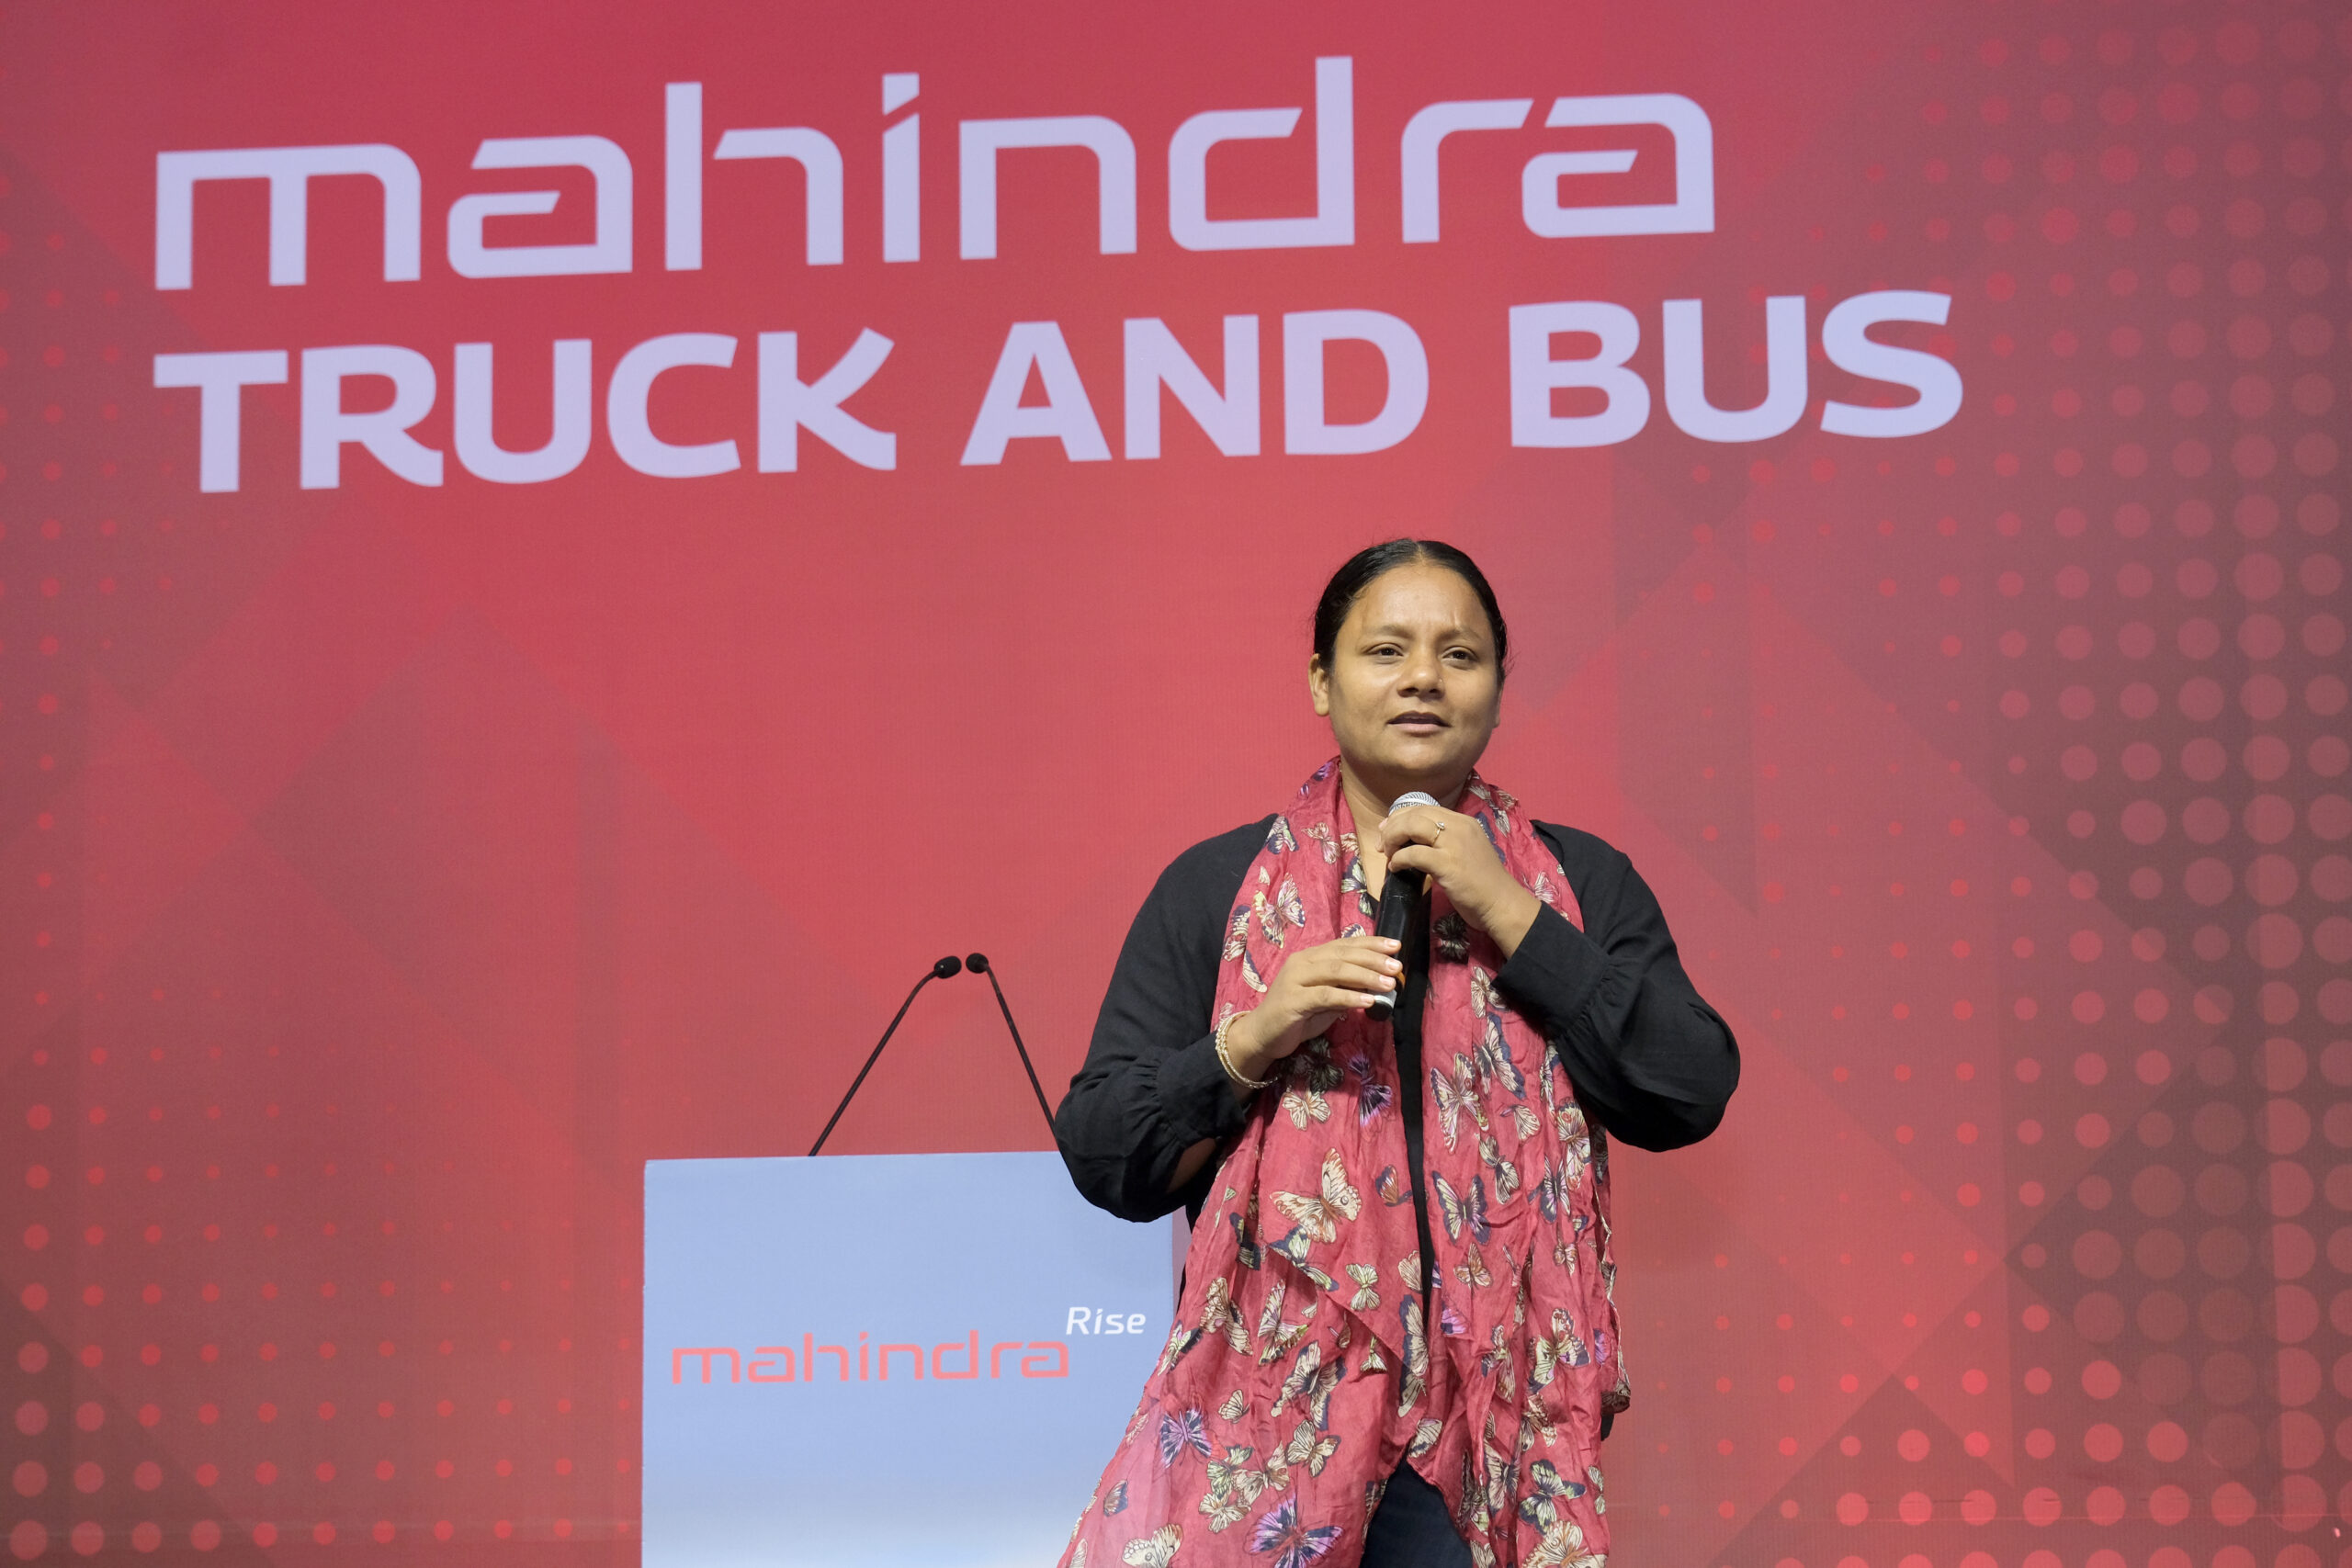 Arunima Sinha as a motivational speaker at the annual dealers conference for a corporate in Mumbai